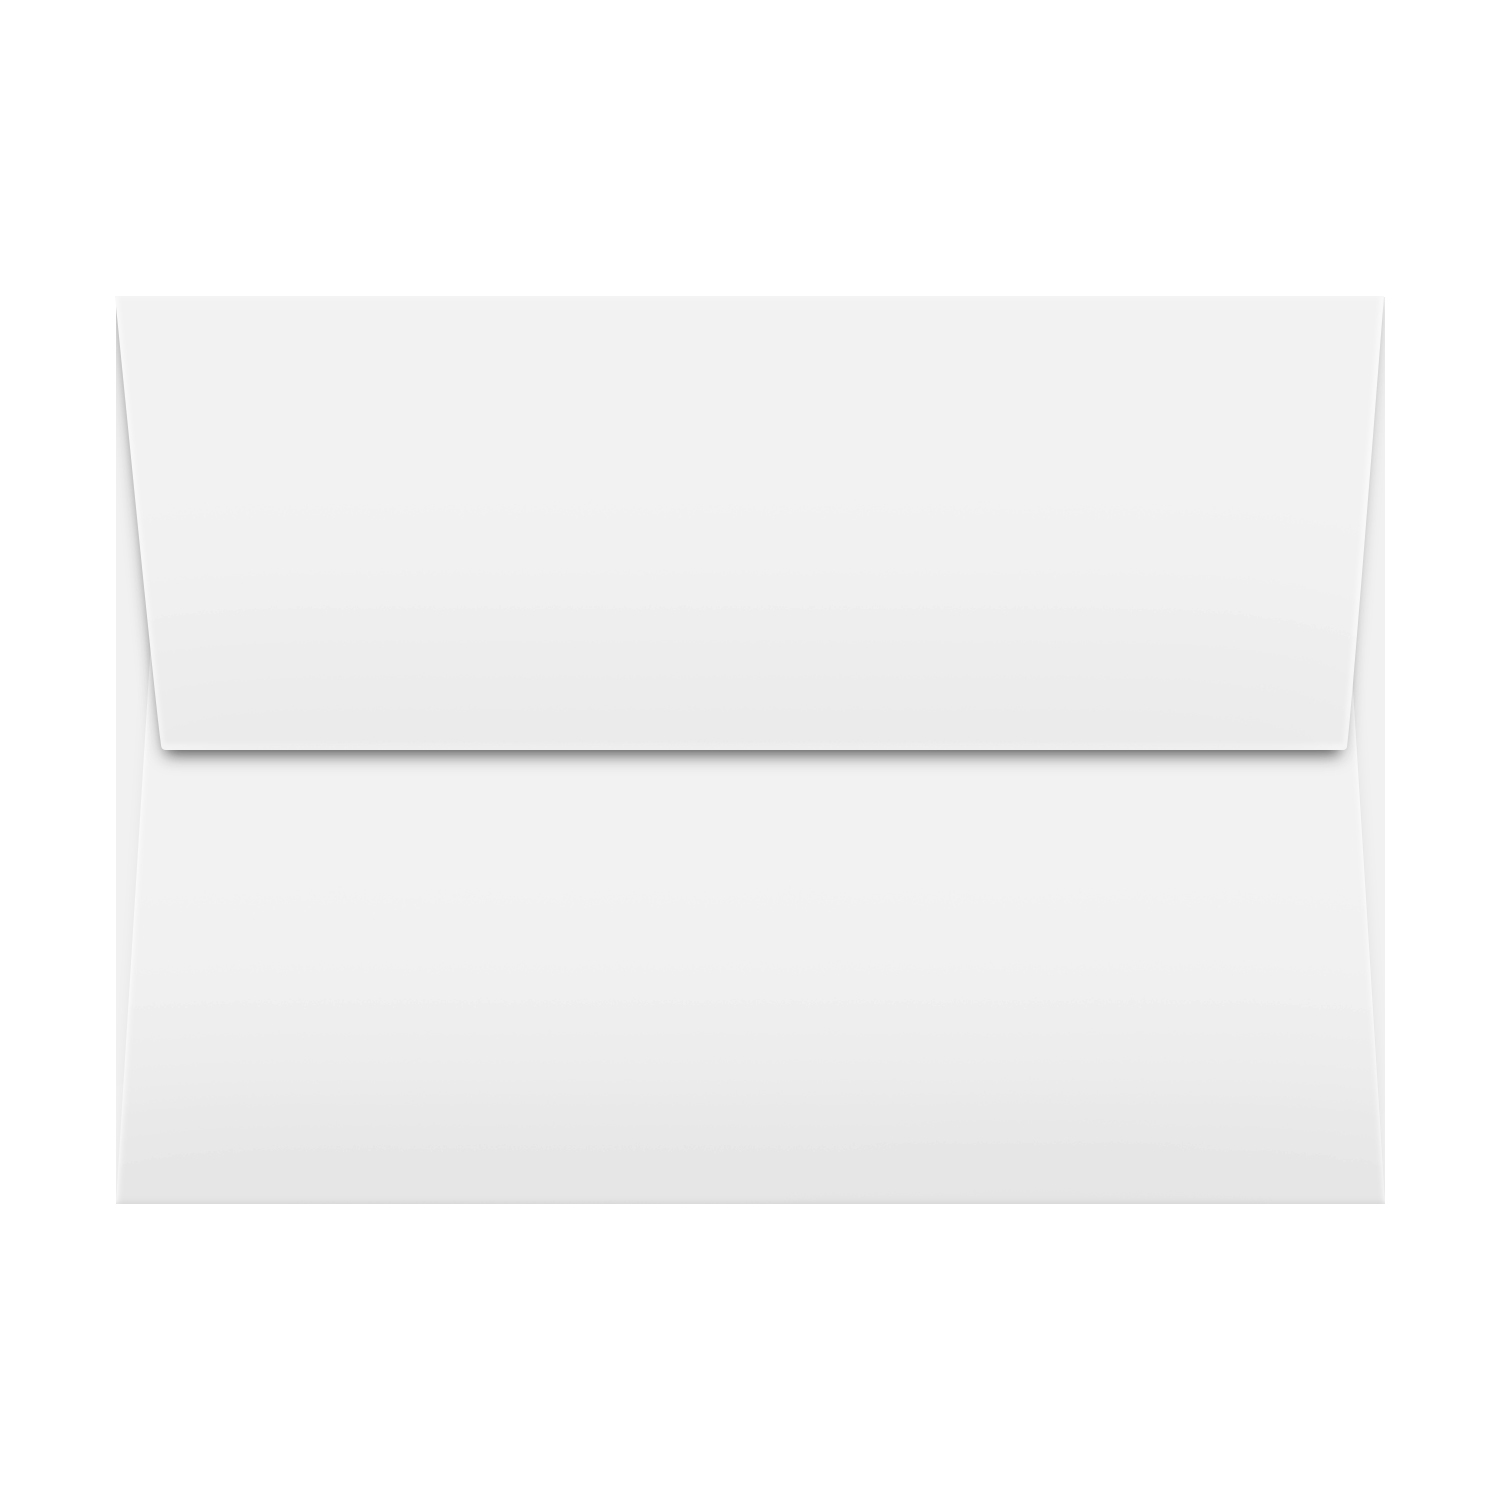 Heavyweight Blank White A2 Folded Note Cards - 4.25 x 5.5 - Greeting  Cards for Card Making - Thick 80lb Stock - Inkjet/Laser Printer Compatible  (40